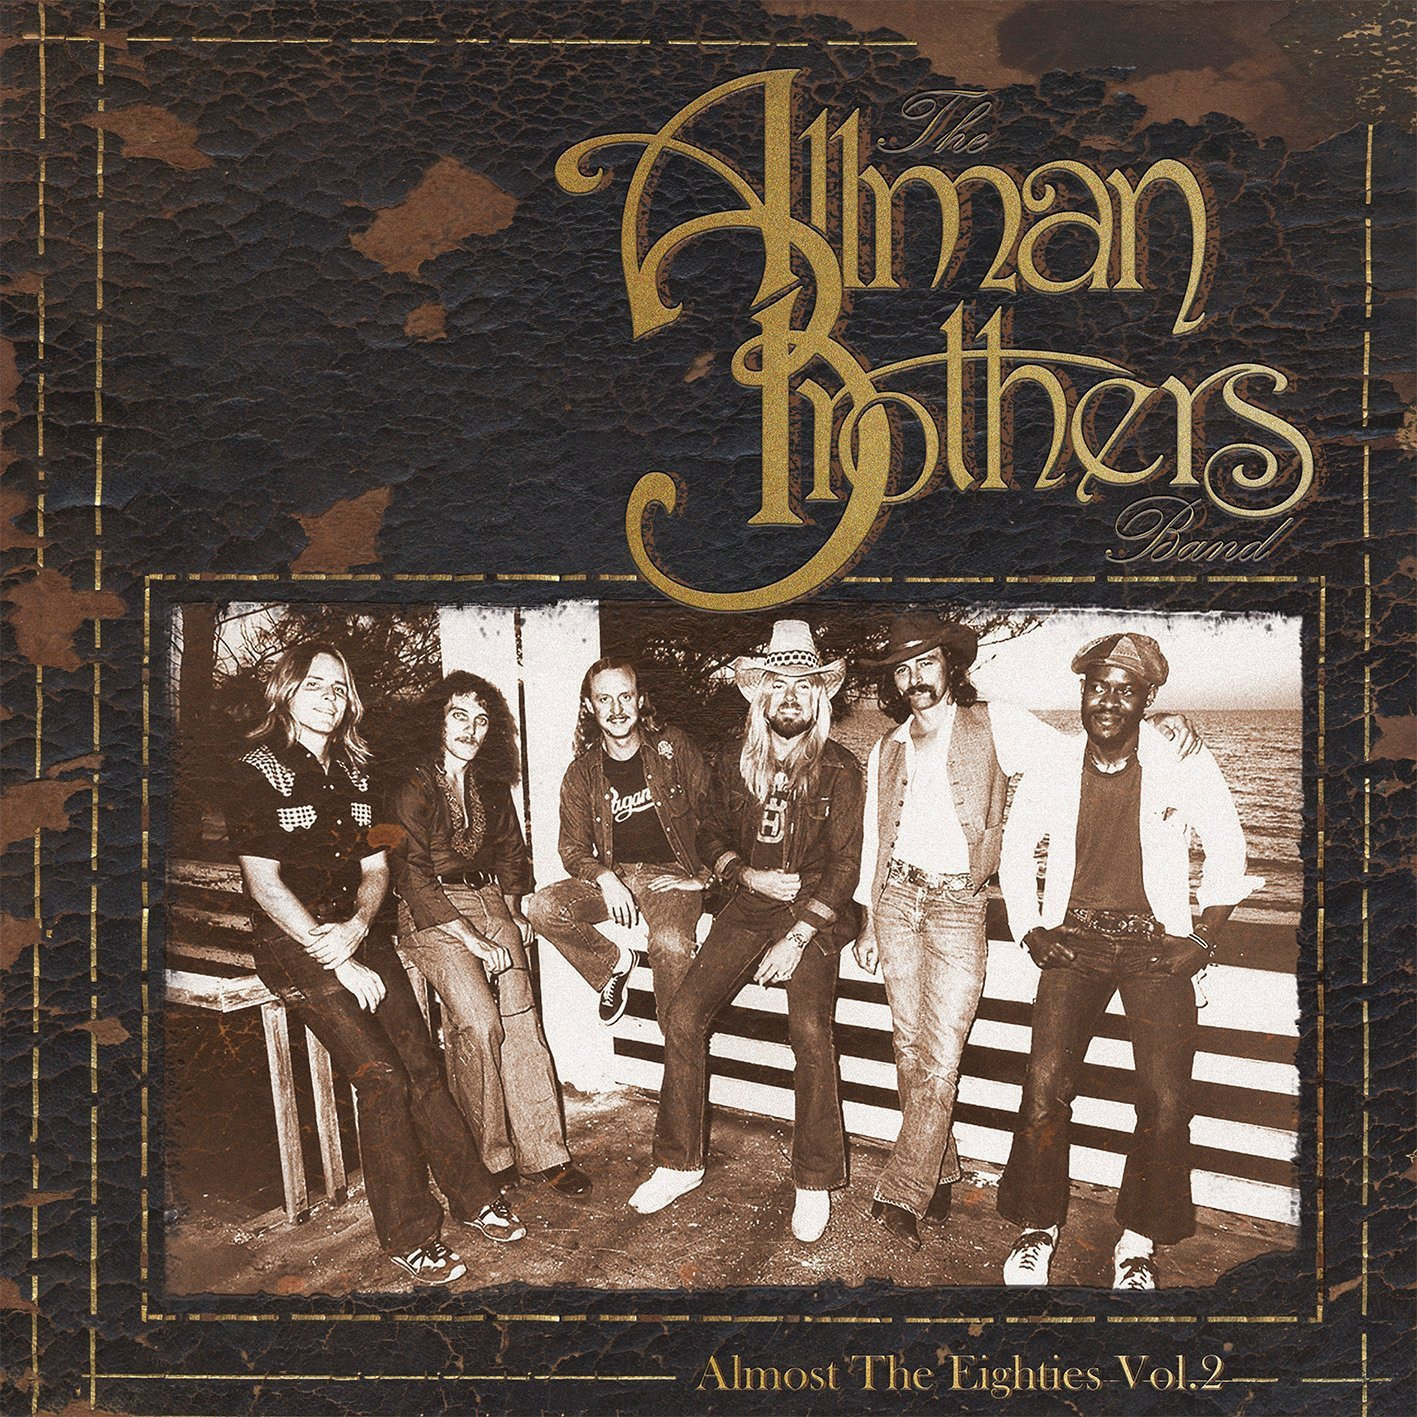 Грамофонна плоча The Allman Brothers Band - Almost The Eighties Vol. 2 (2 LP)